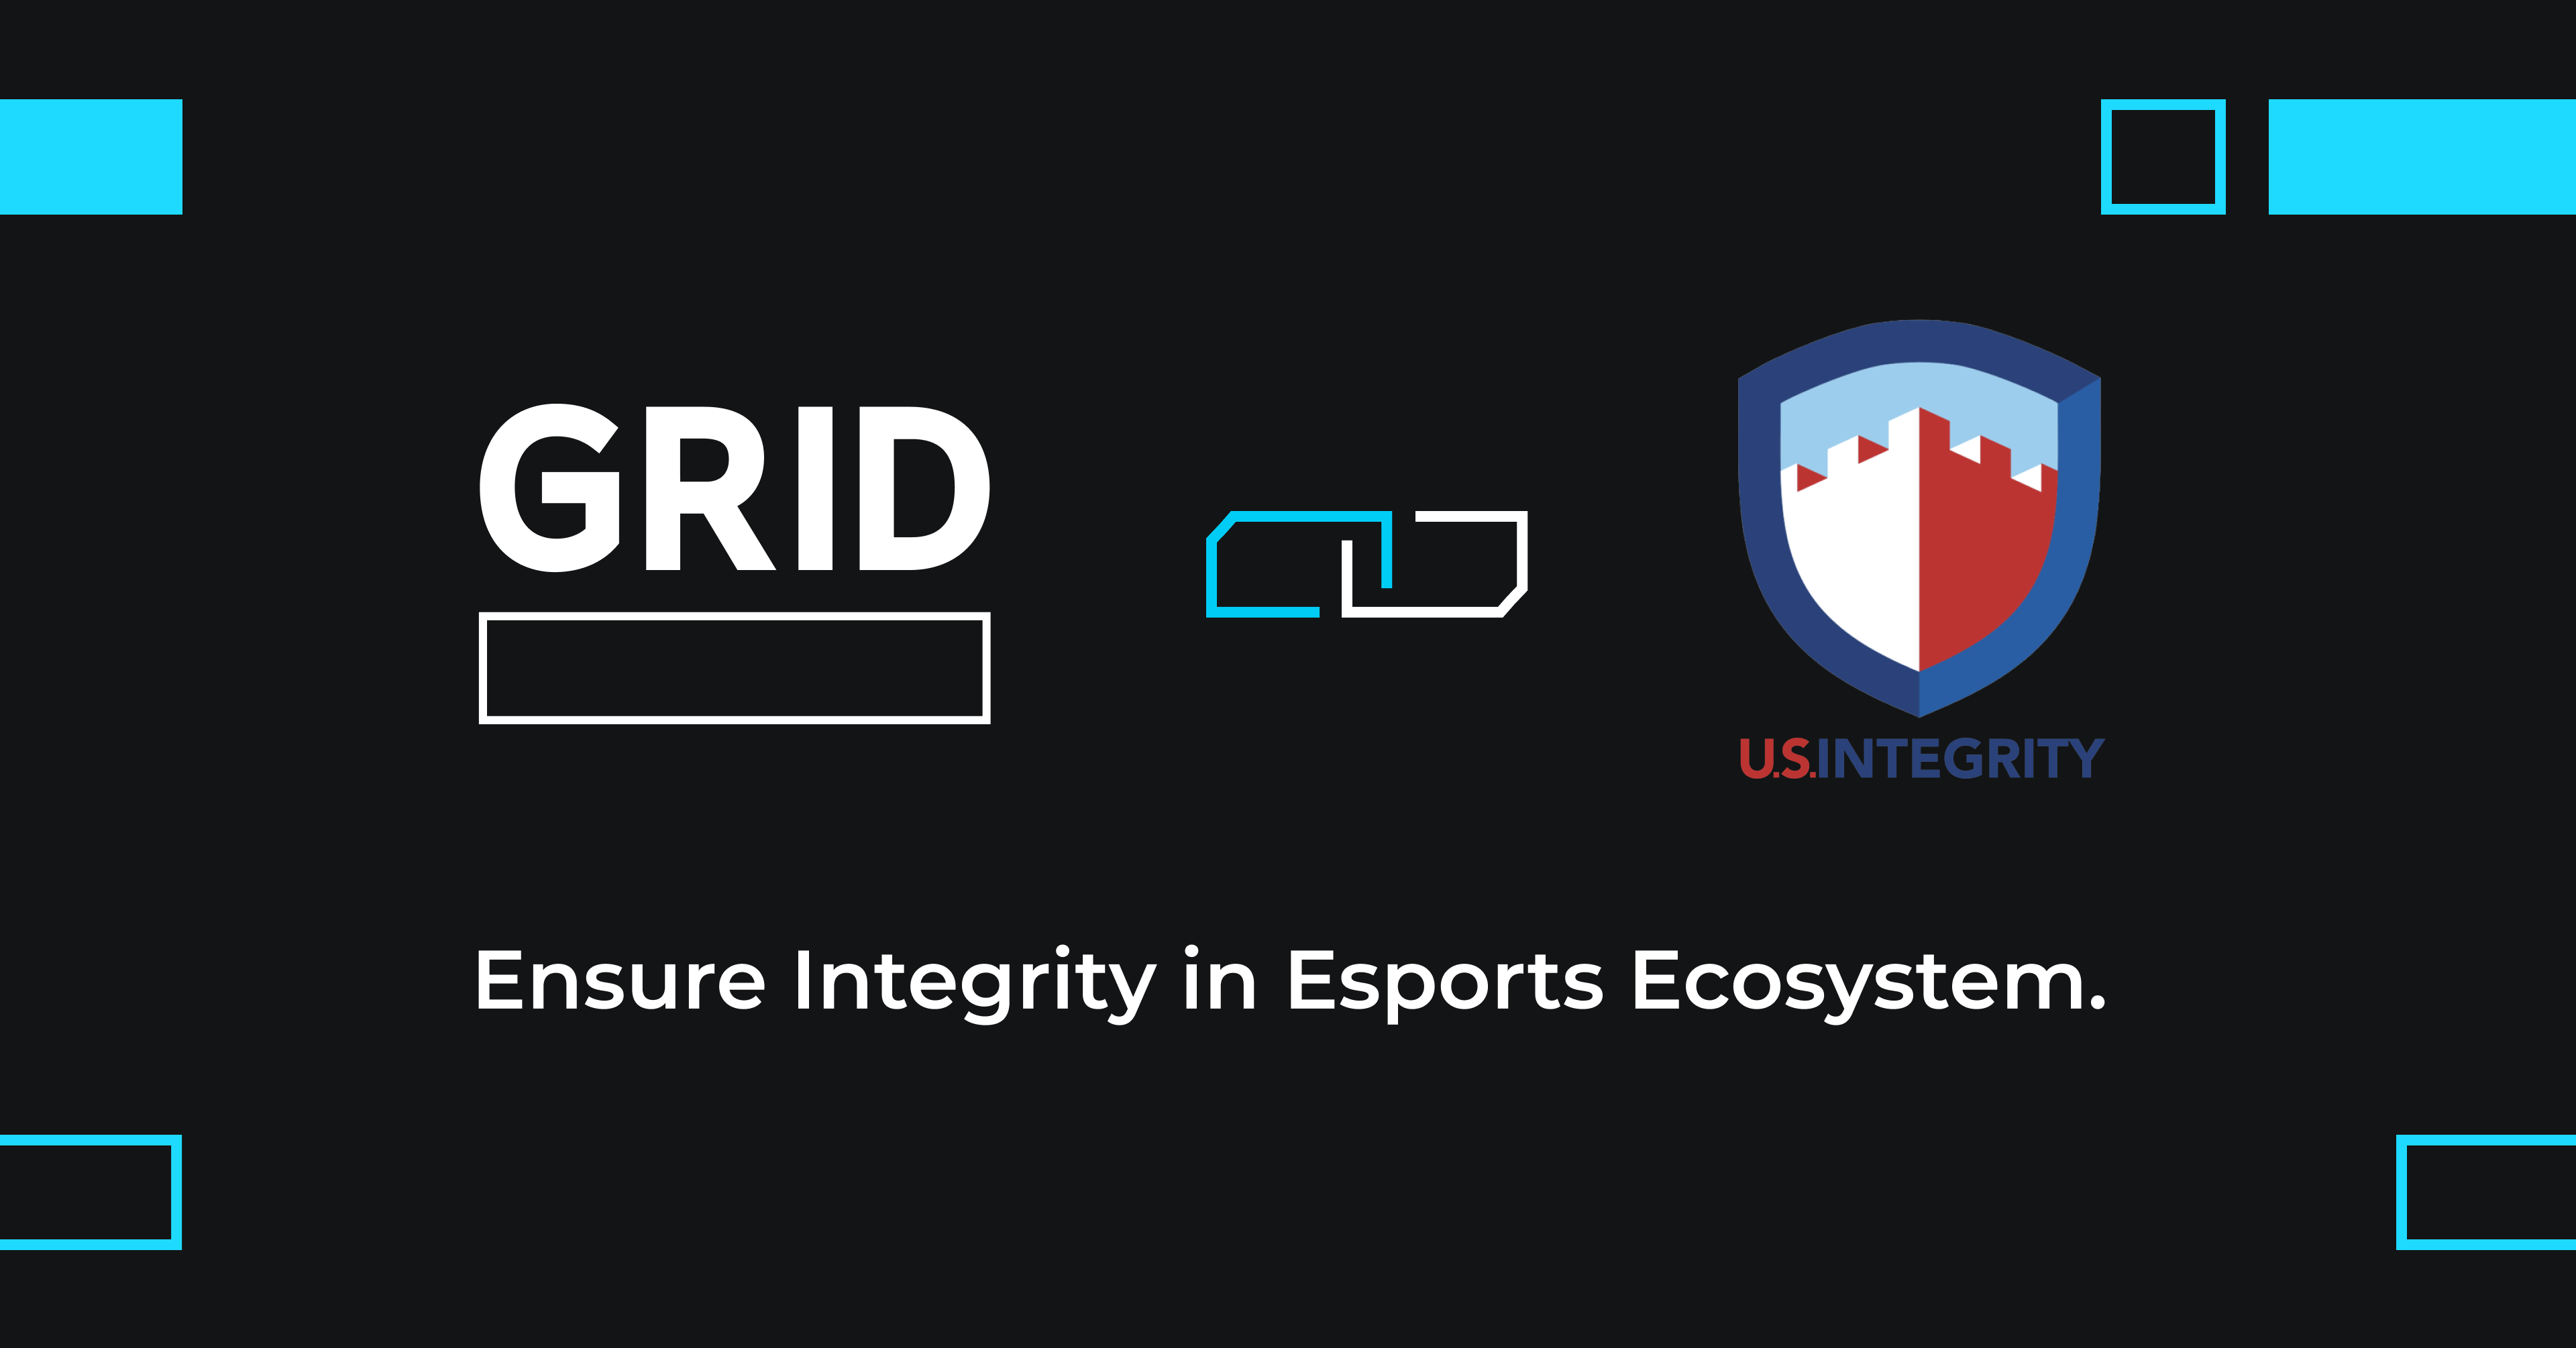 U.S. Integrity Partners with GRID for Esports Integrity Framework